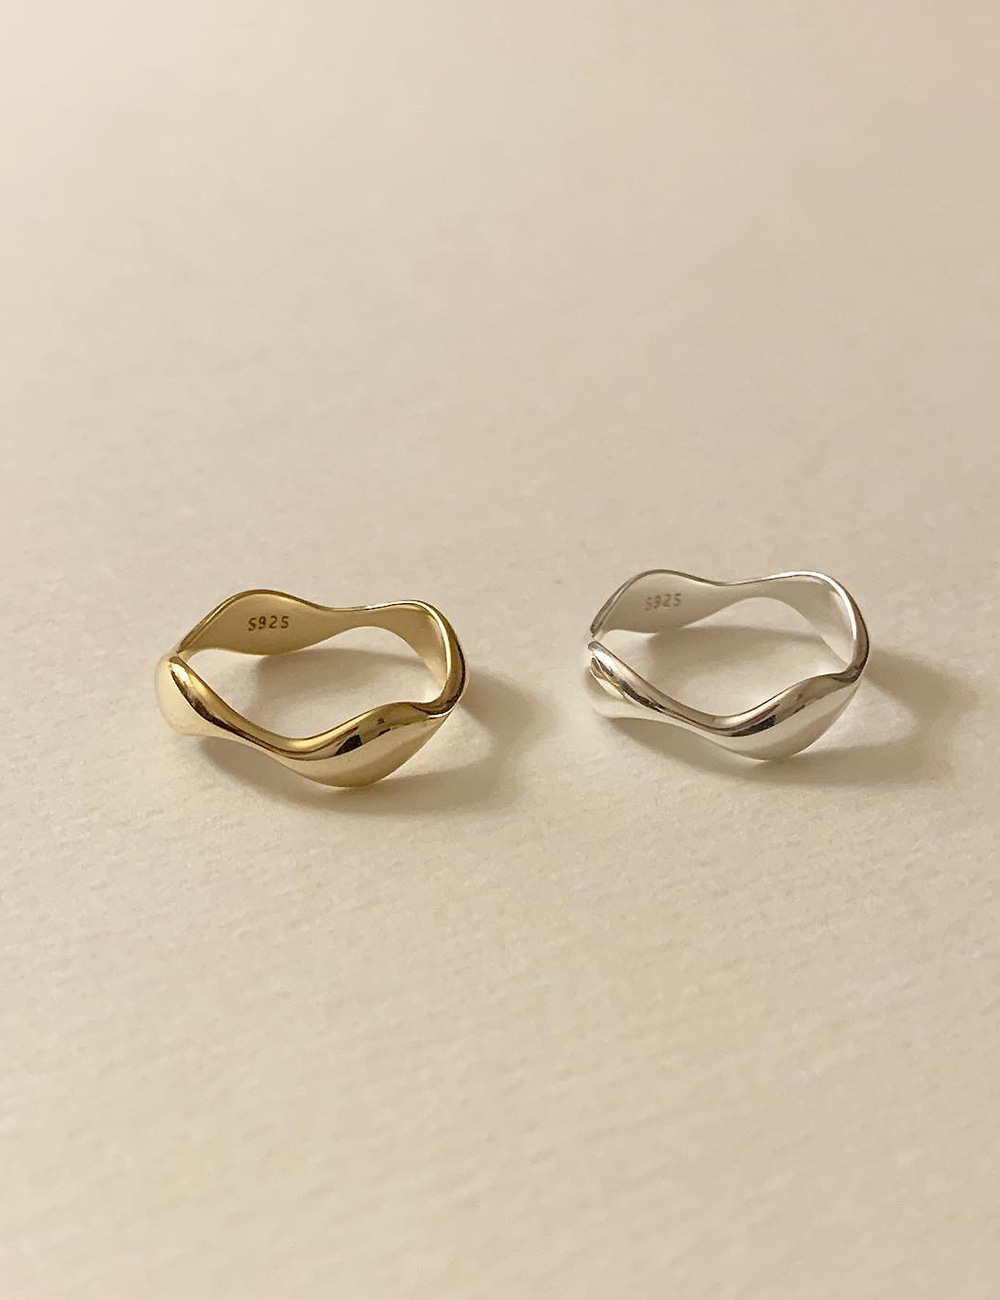 (silver 92.5) Flow ring